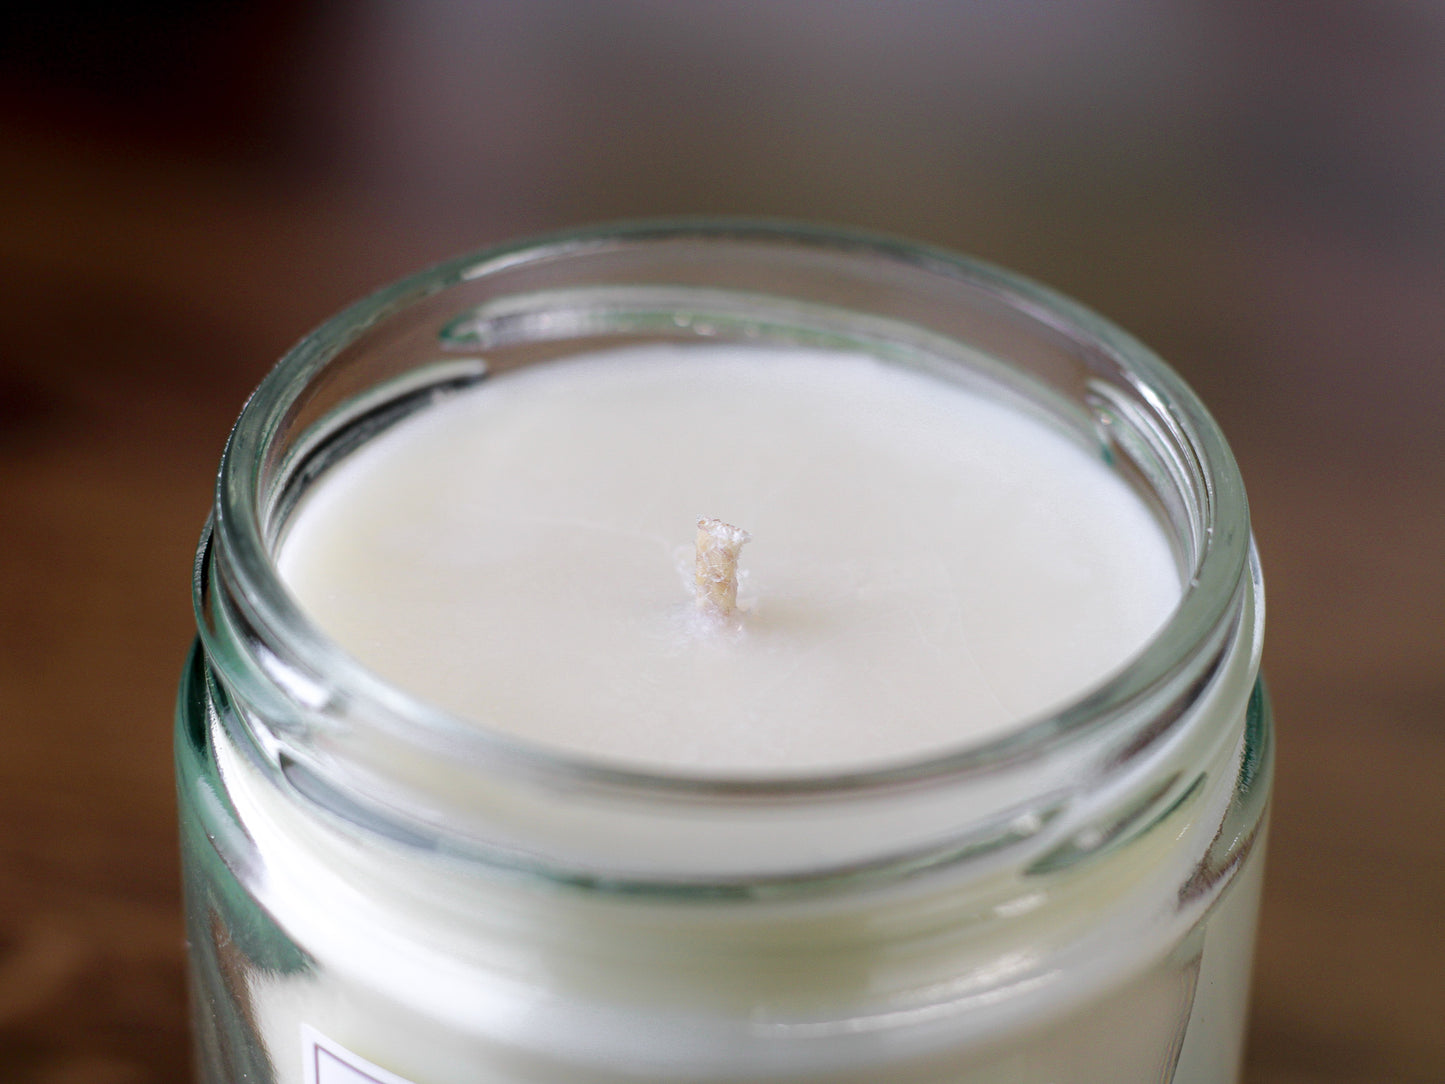 Apple Blossom Soy Wax Candle